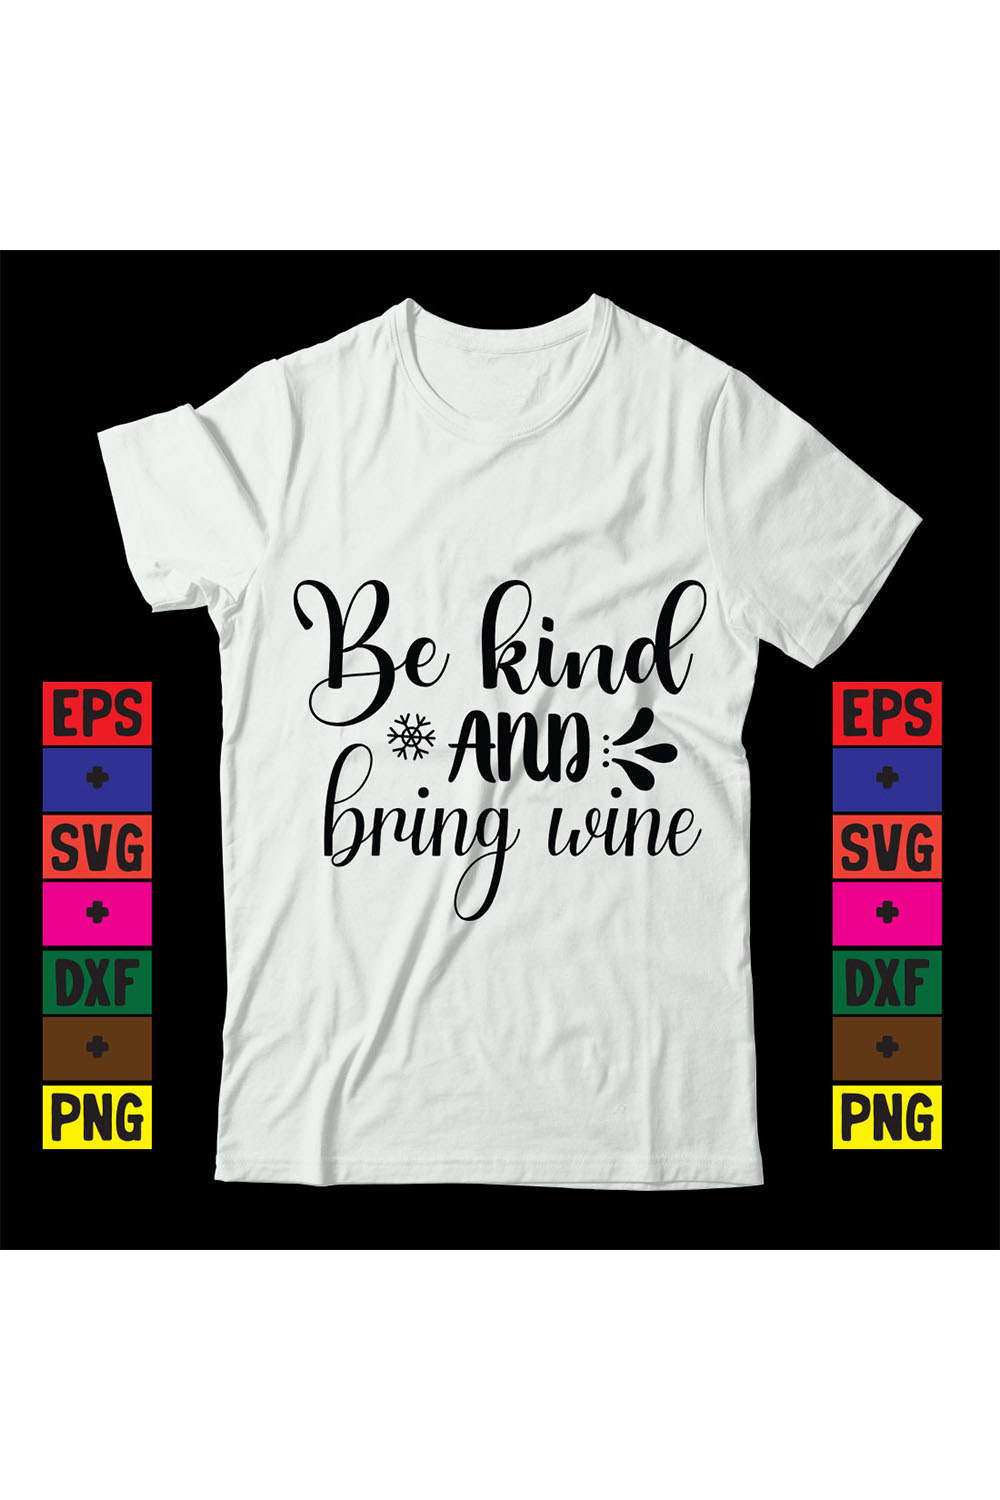 Be kind and bring wine pinterest preview image.